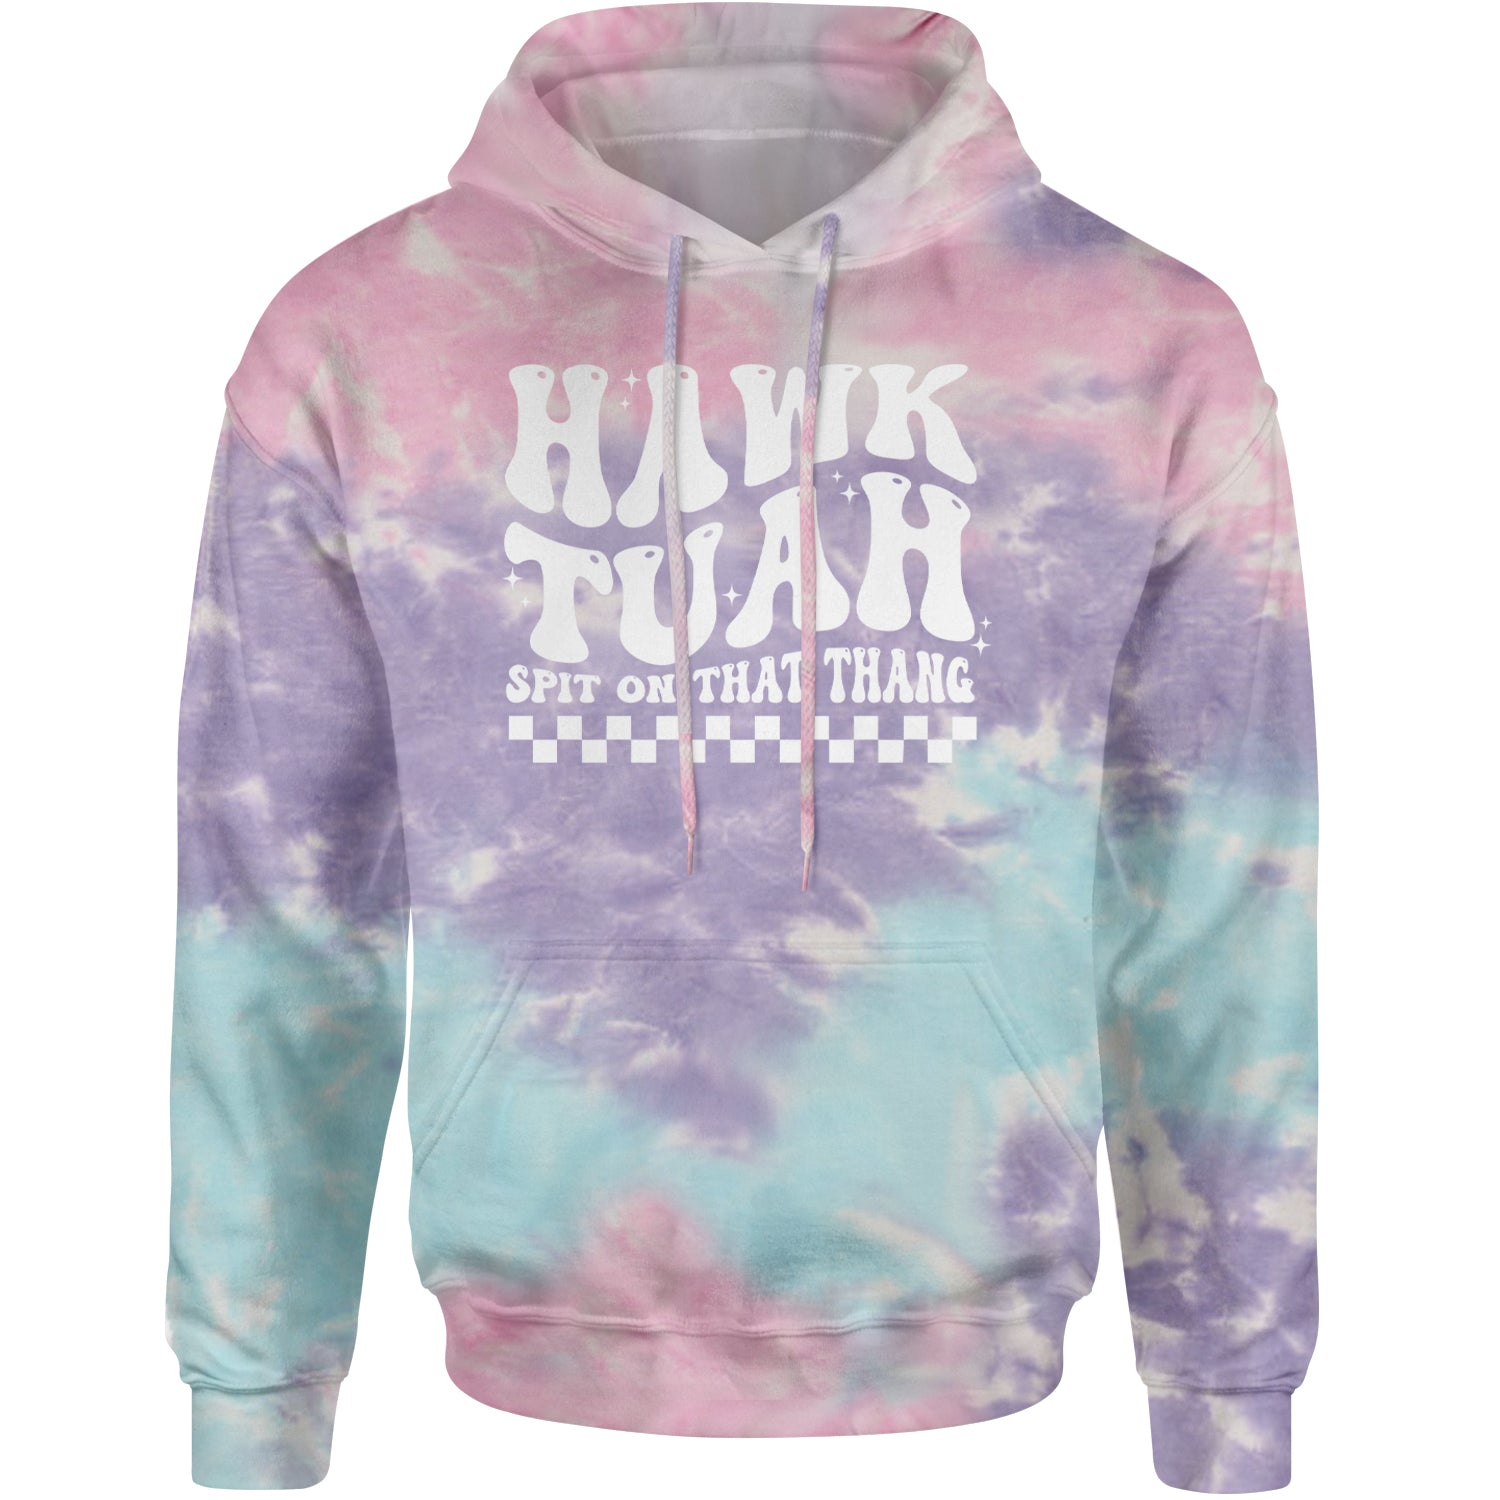 Hawk Tuah Spit On That Thang Adult Hoodie Sweatshirt Cotton Candy